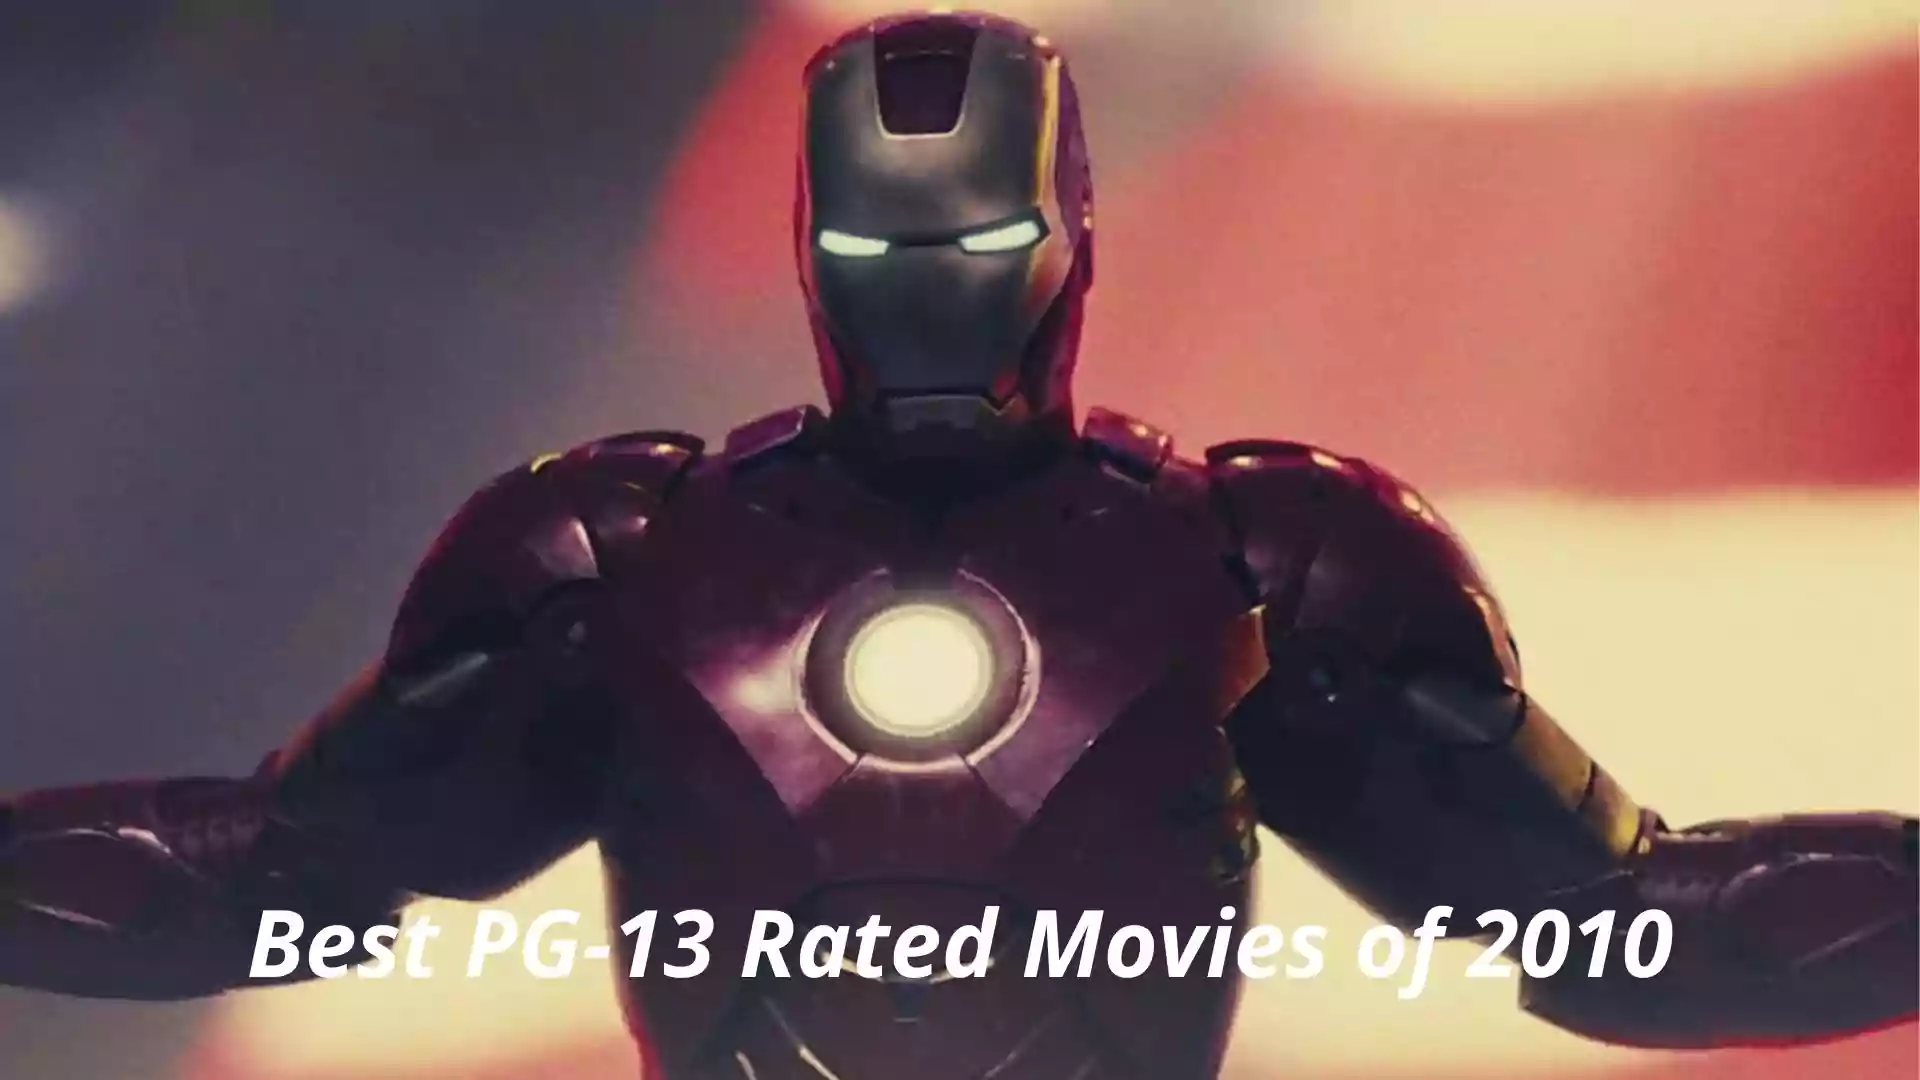 Best PG-13 Rated Movies of 2010